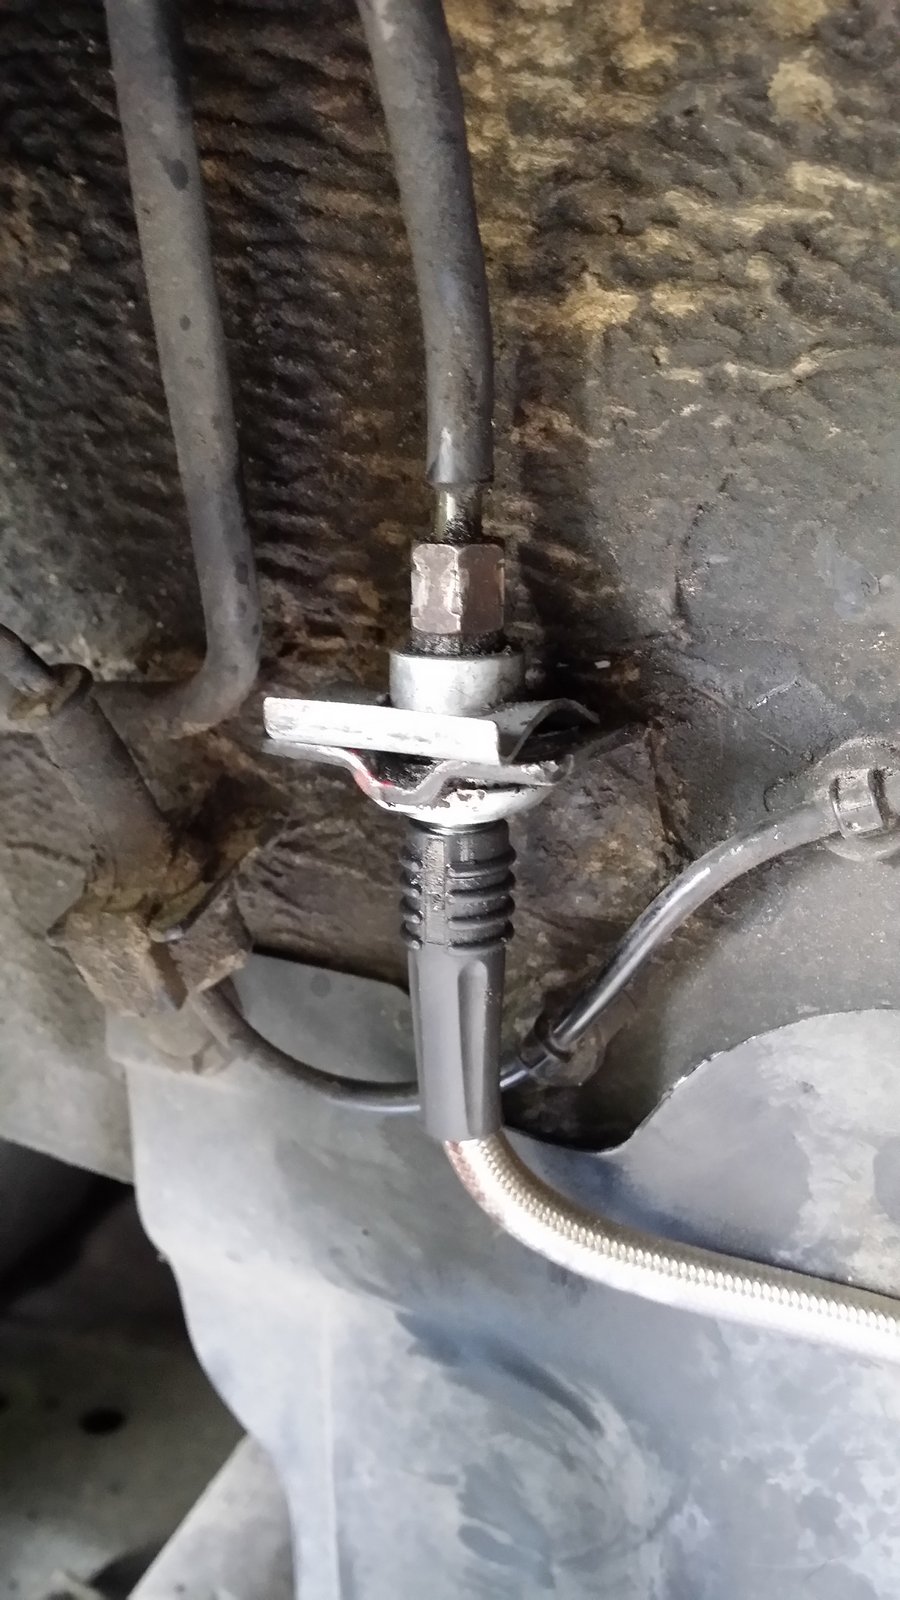 ** BE CAREFUL NOT TO STRIP YOU BRAKE LINE GET A PROPER LINE WRENCH** BE FAST SO YOU DONT LOOSE ALL YOUR BRAKE FLUID